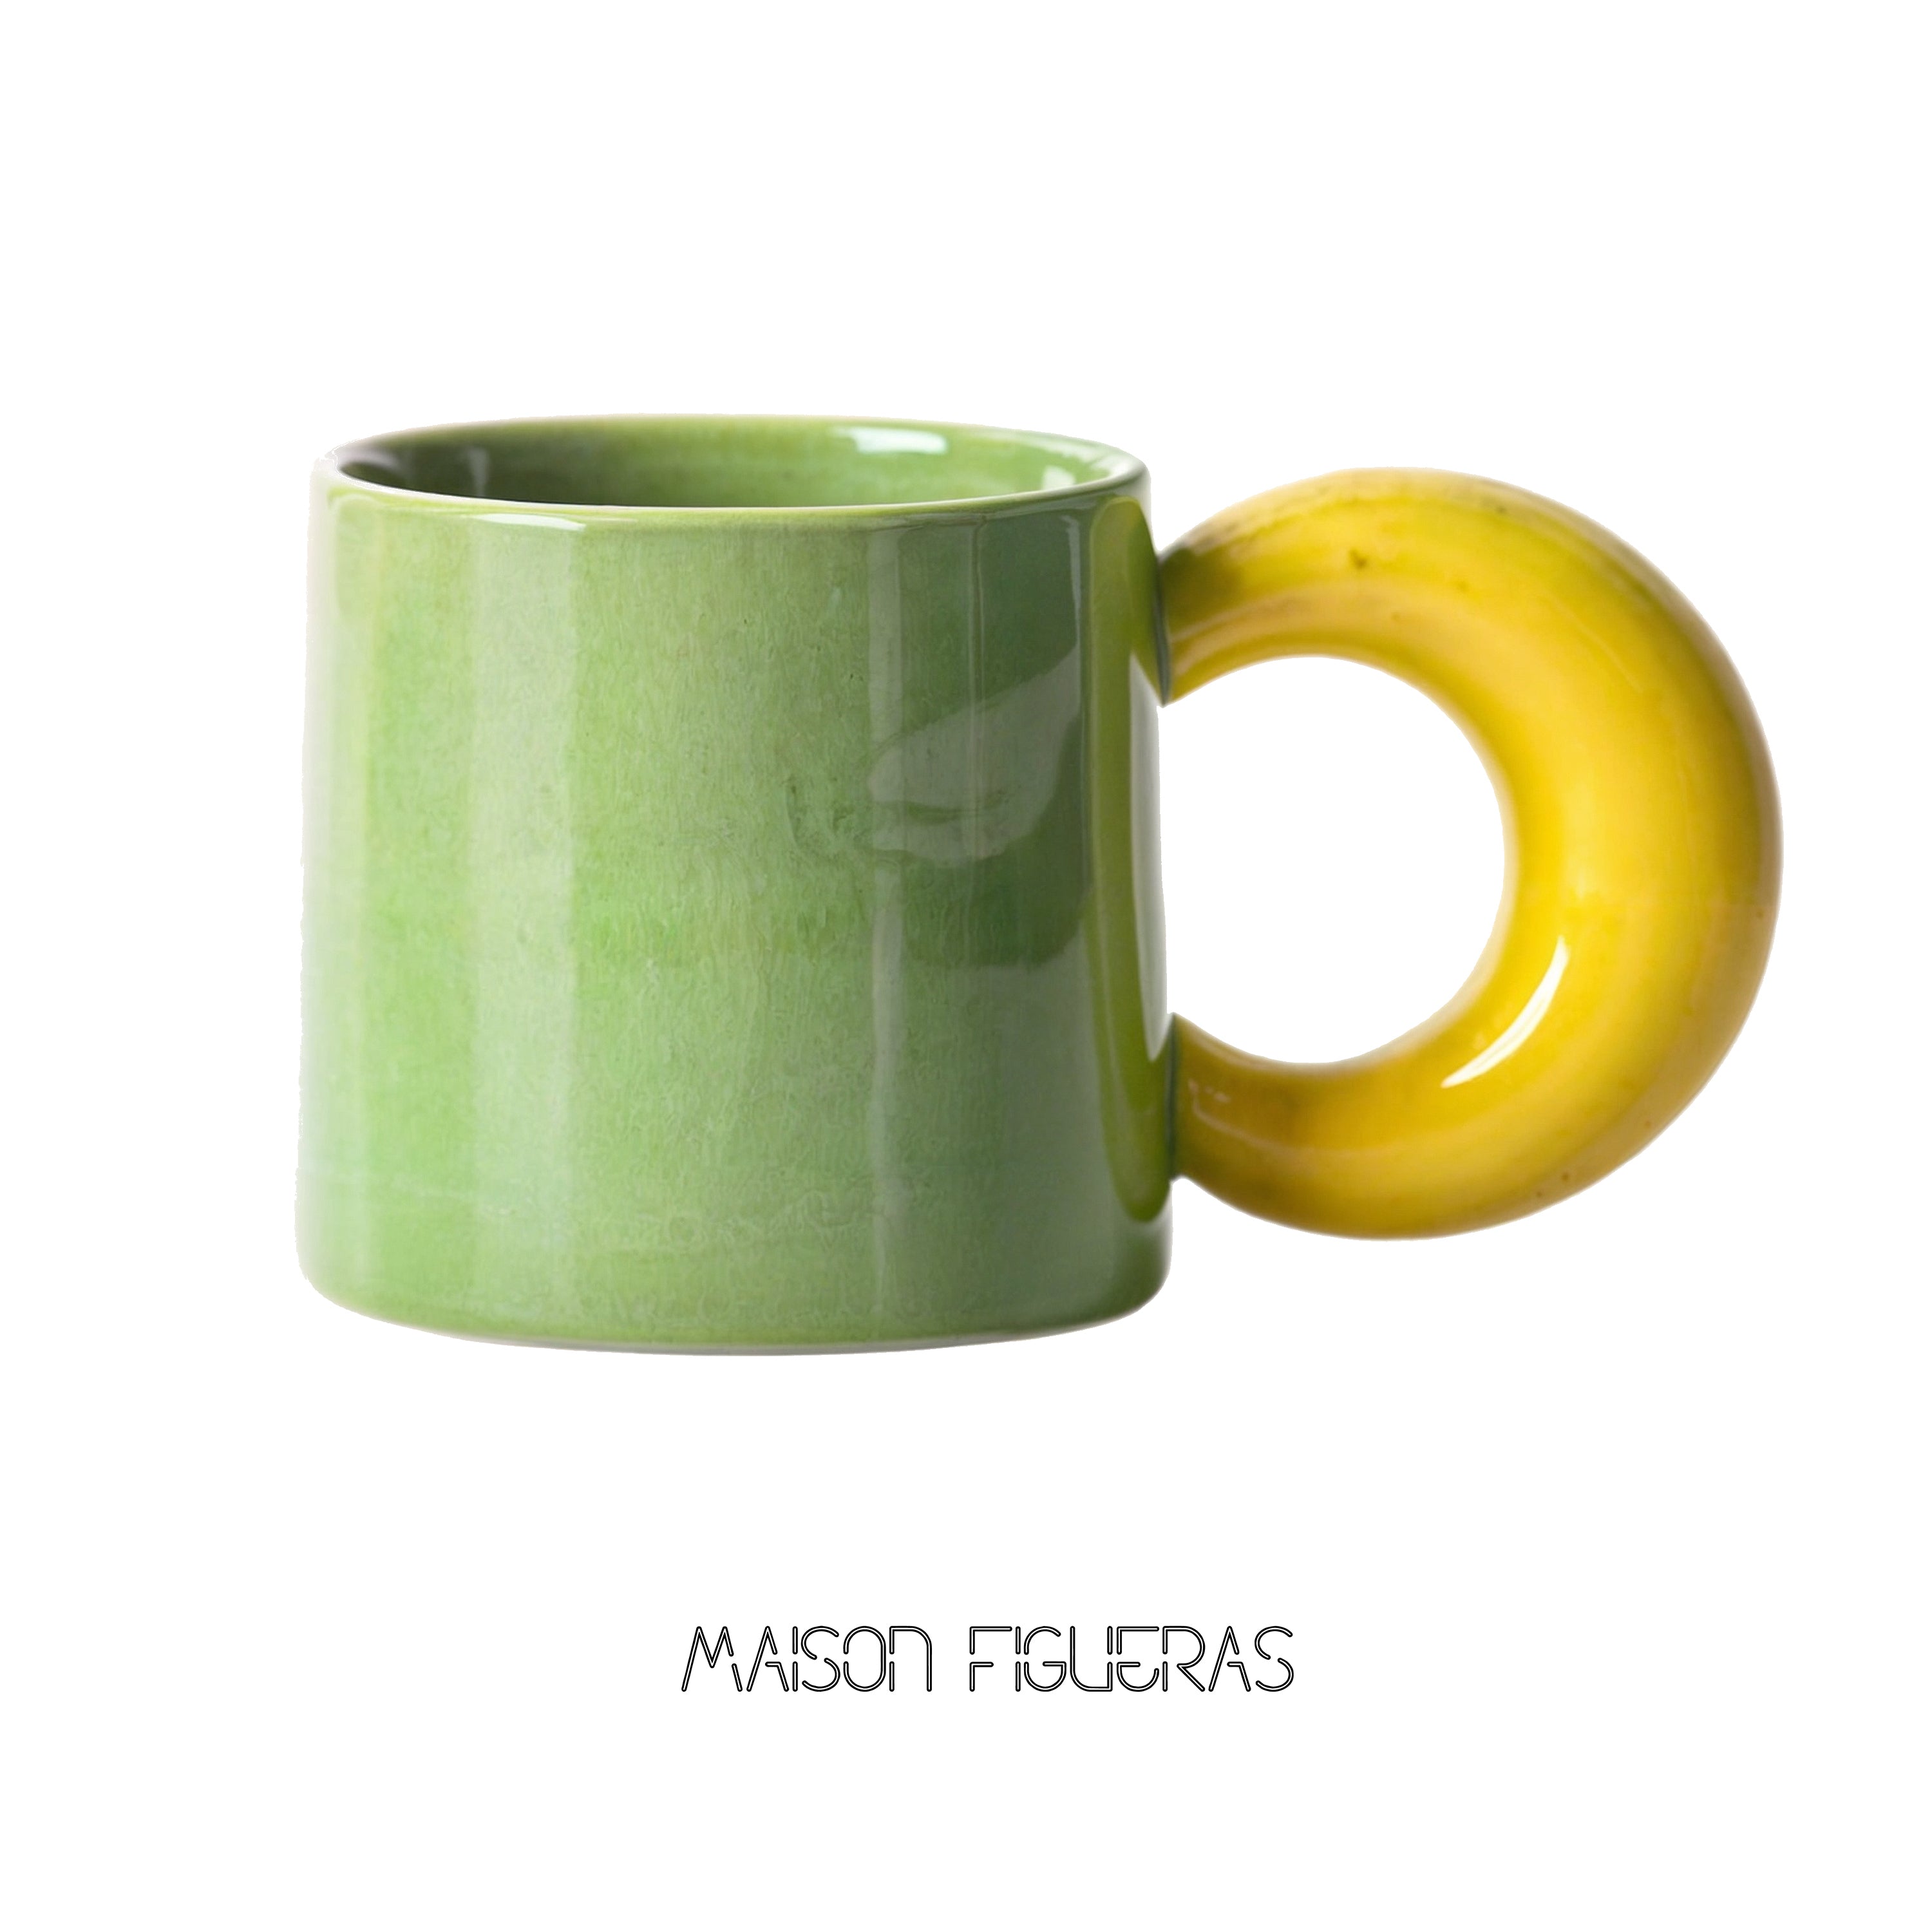 The Color Mugs